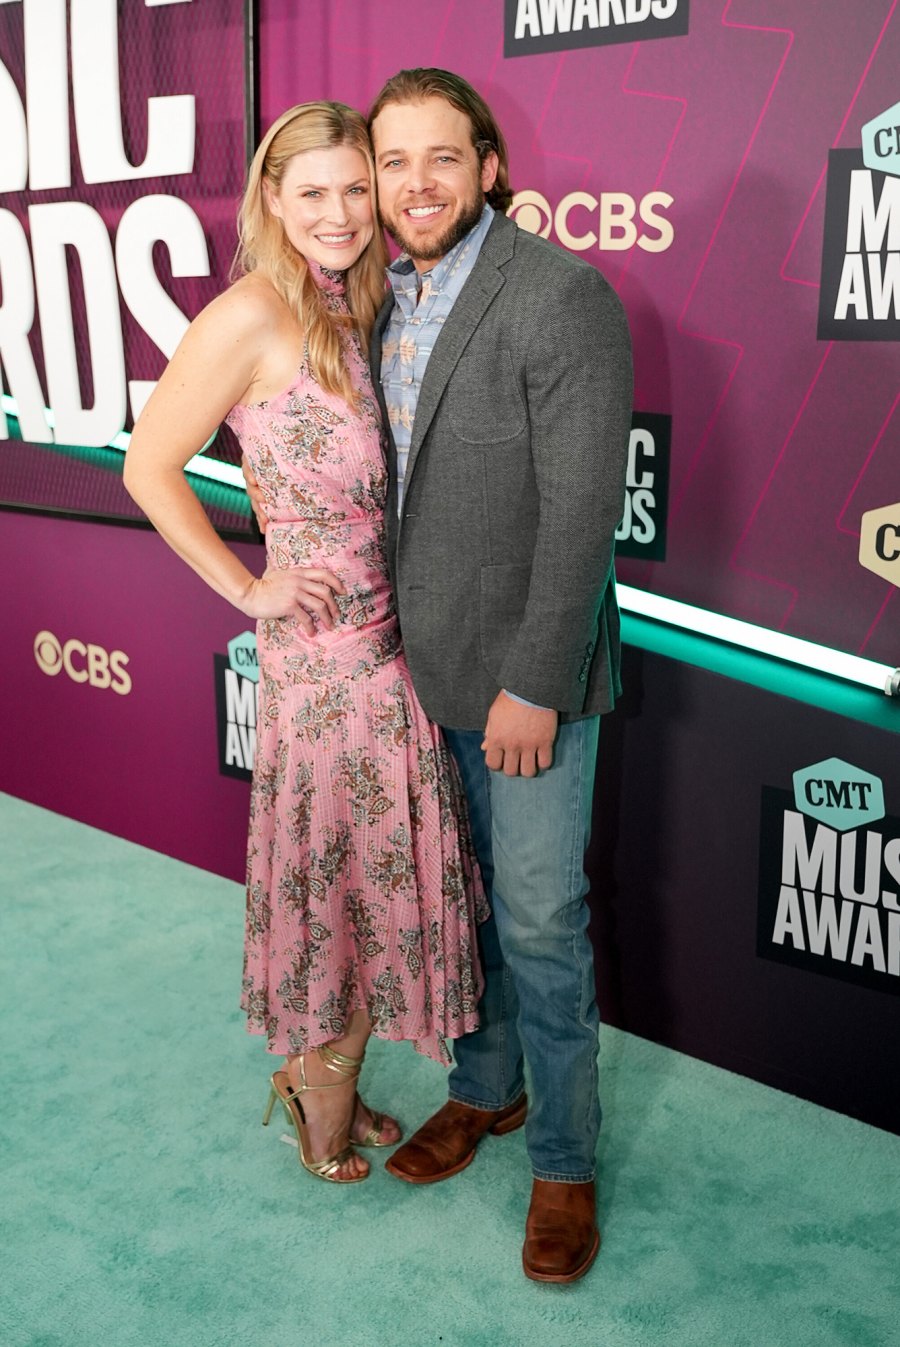 CMT Music Awards 2023 - Hottest Couples - 600 Lexi Murphy and Max Thieriot